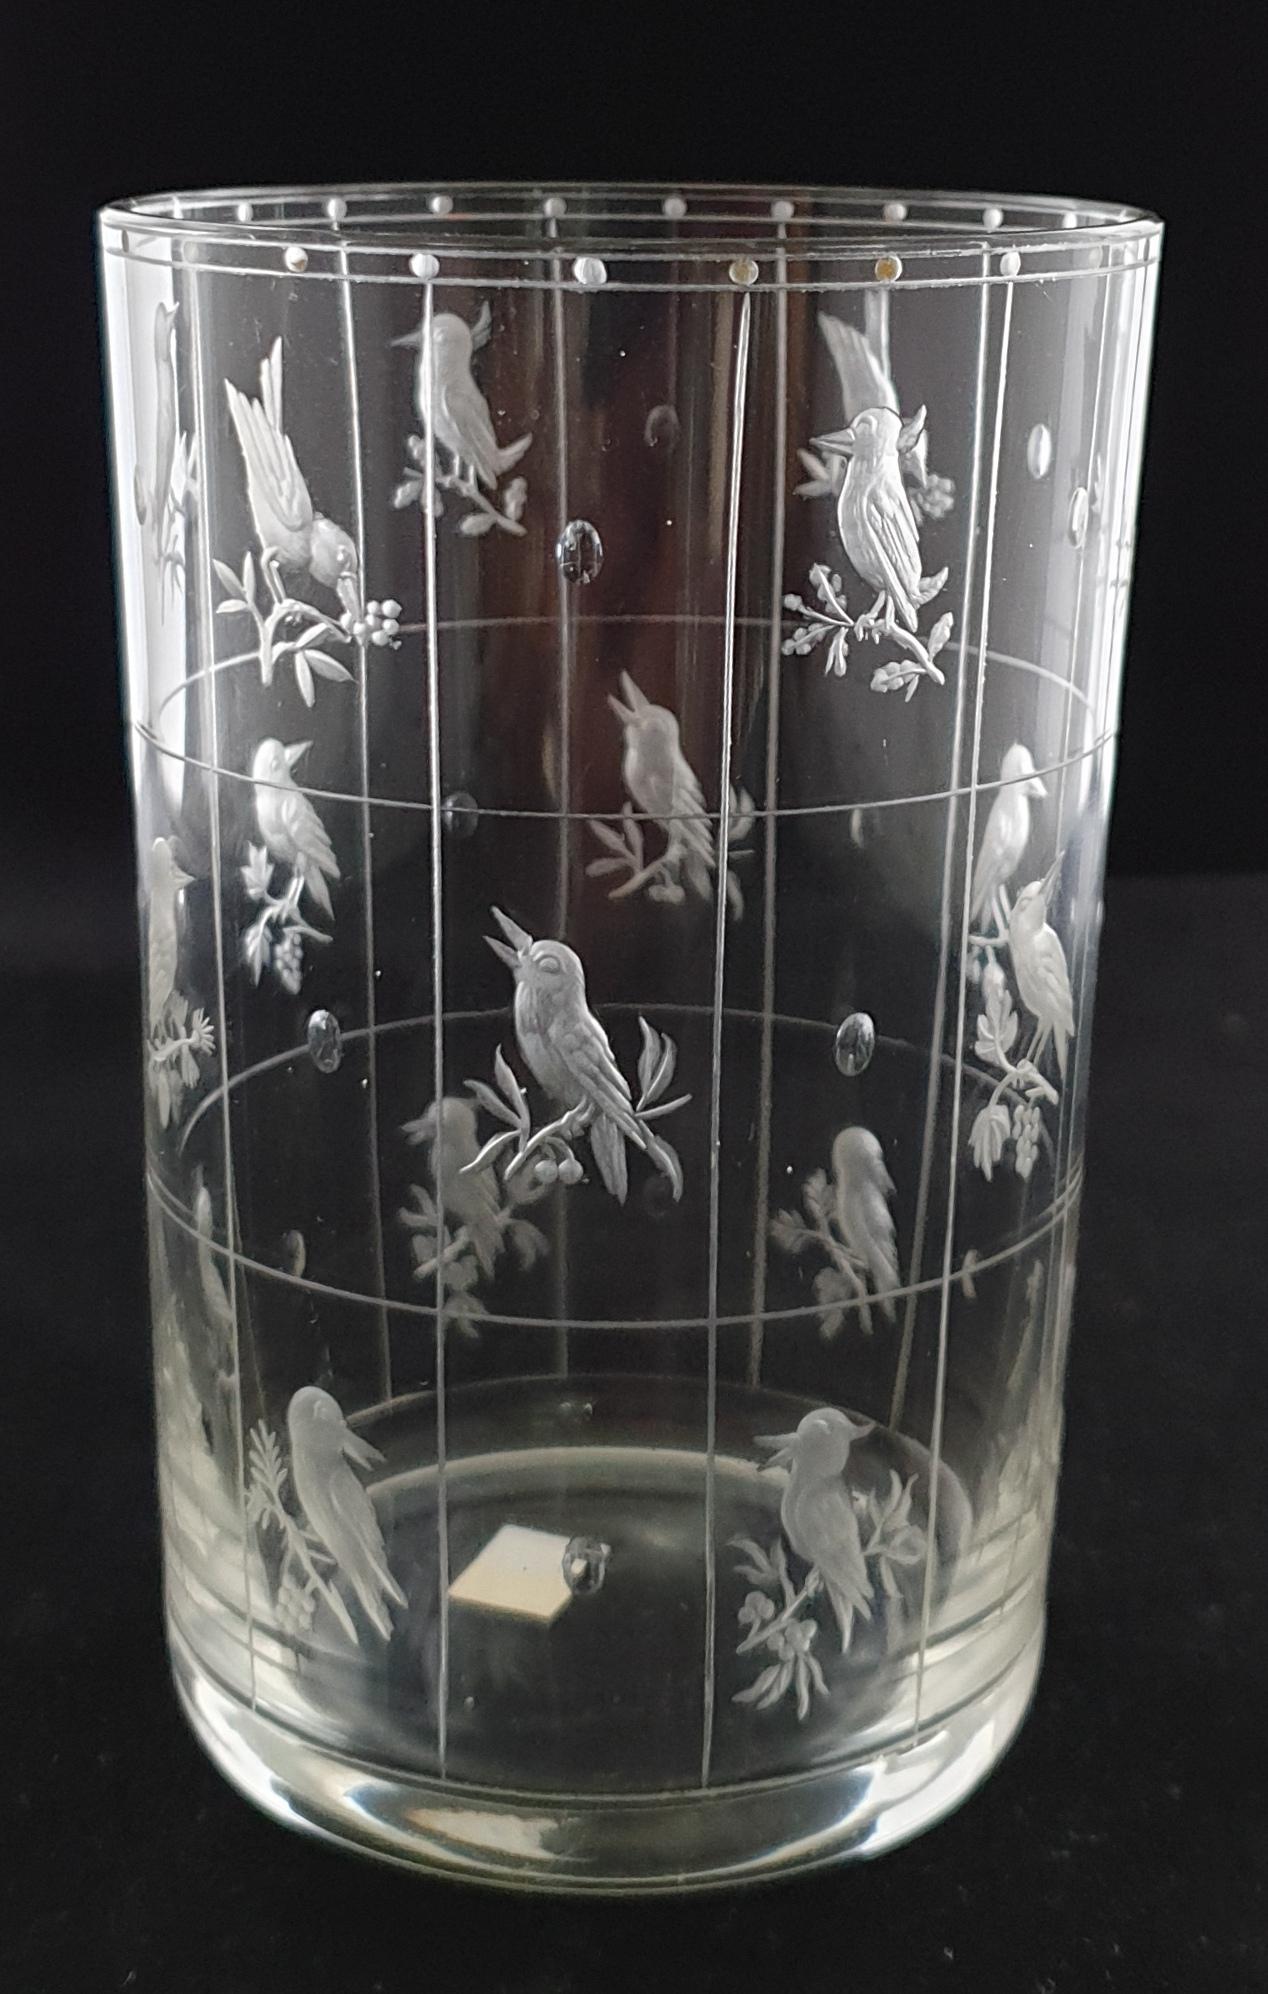 A Swedish art glass, designed by Michael Powolny, featuring blank panels alternating with birds on leafy branches.